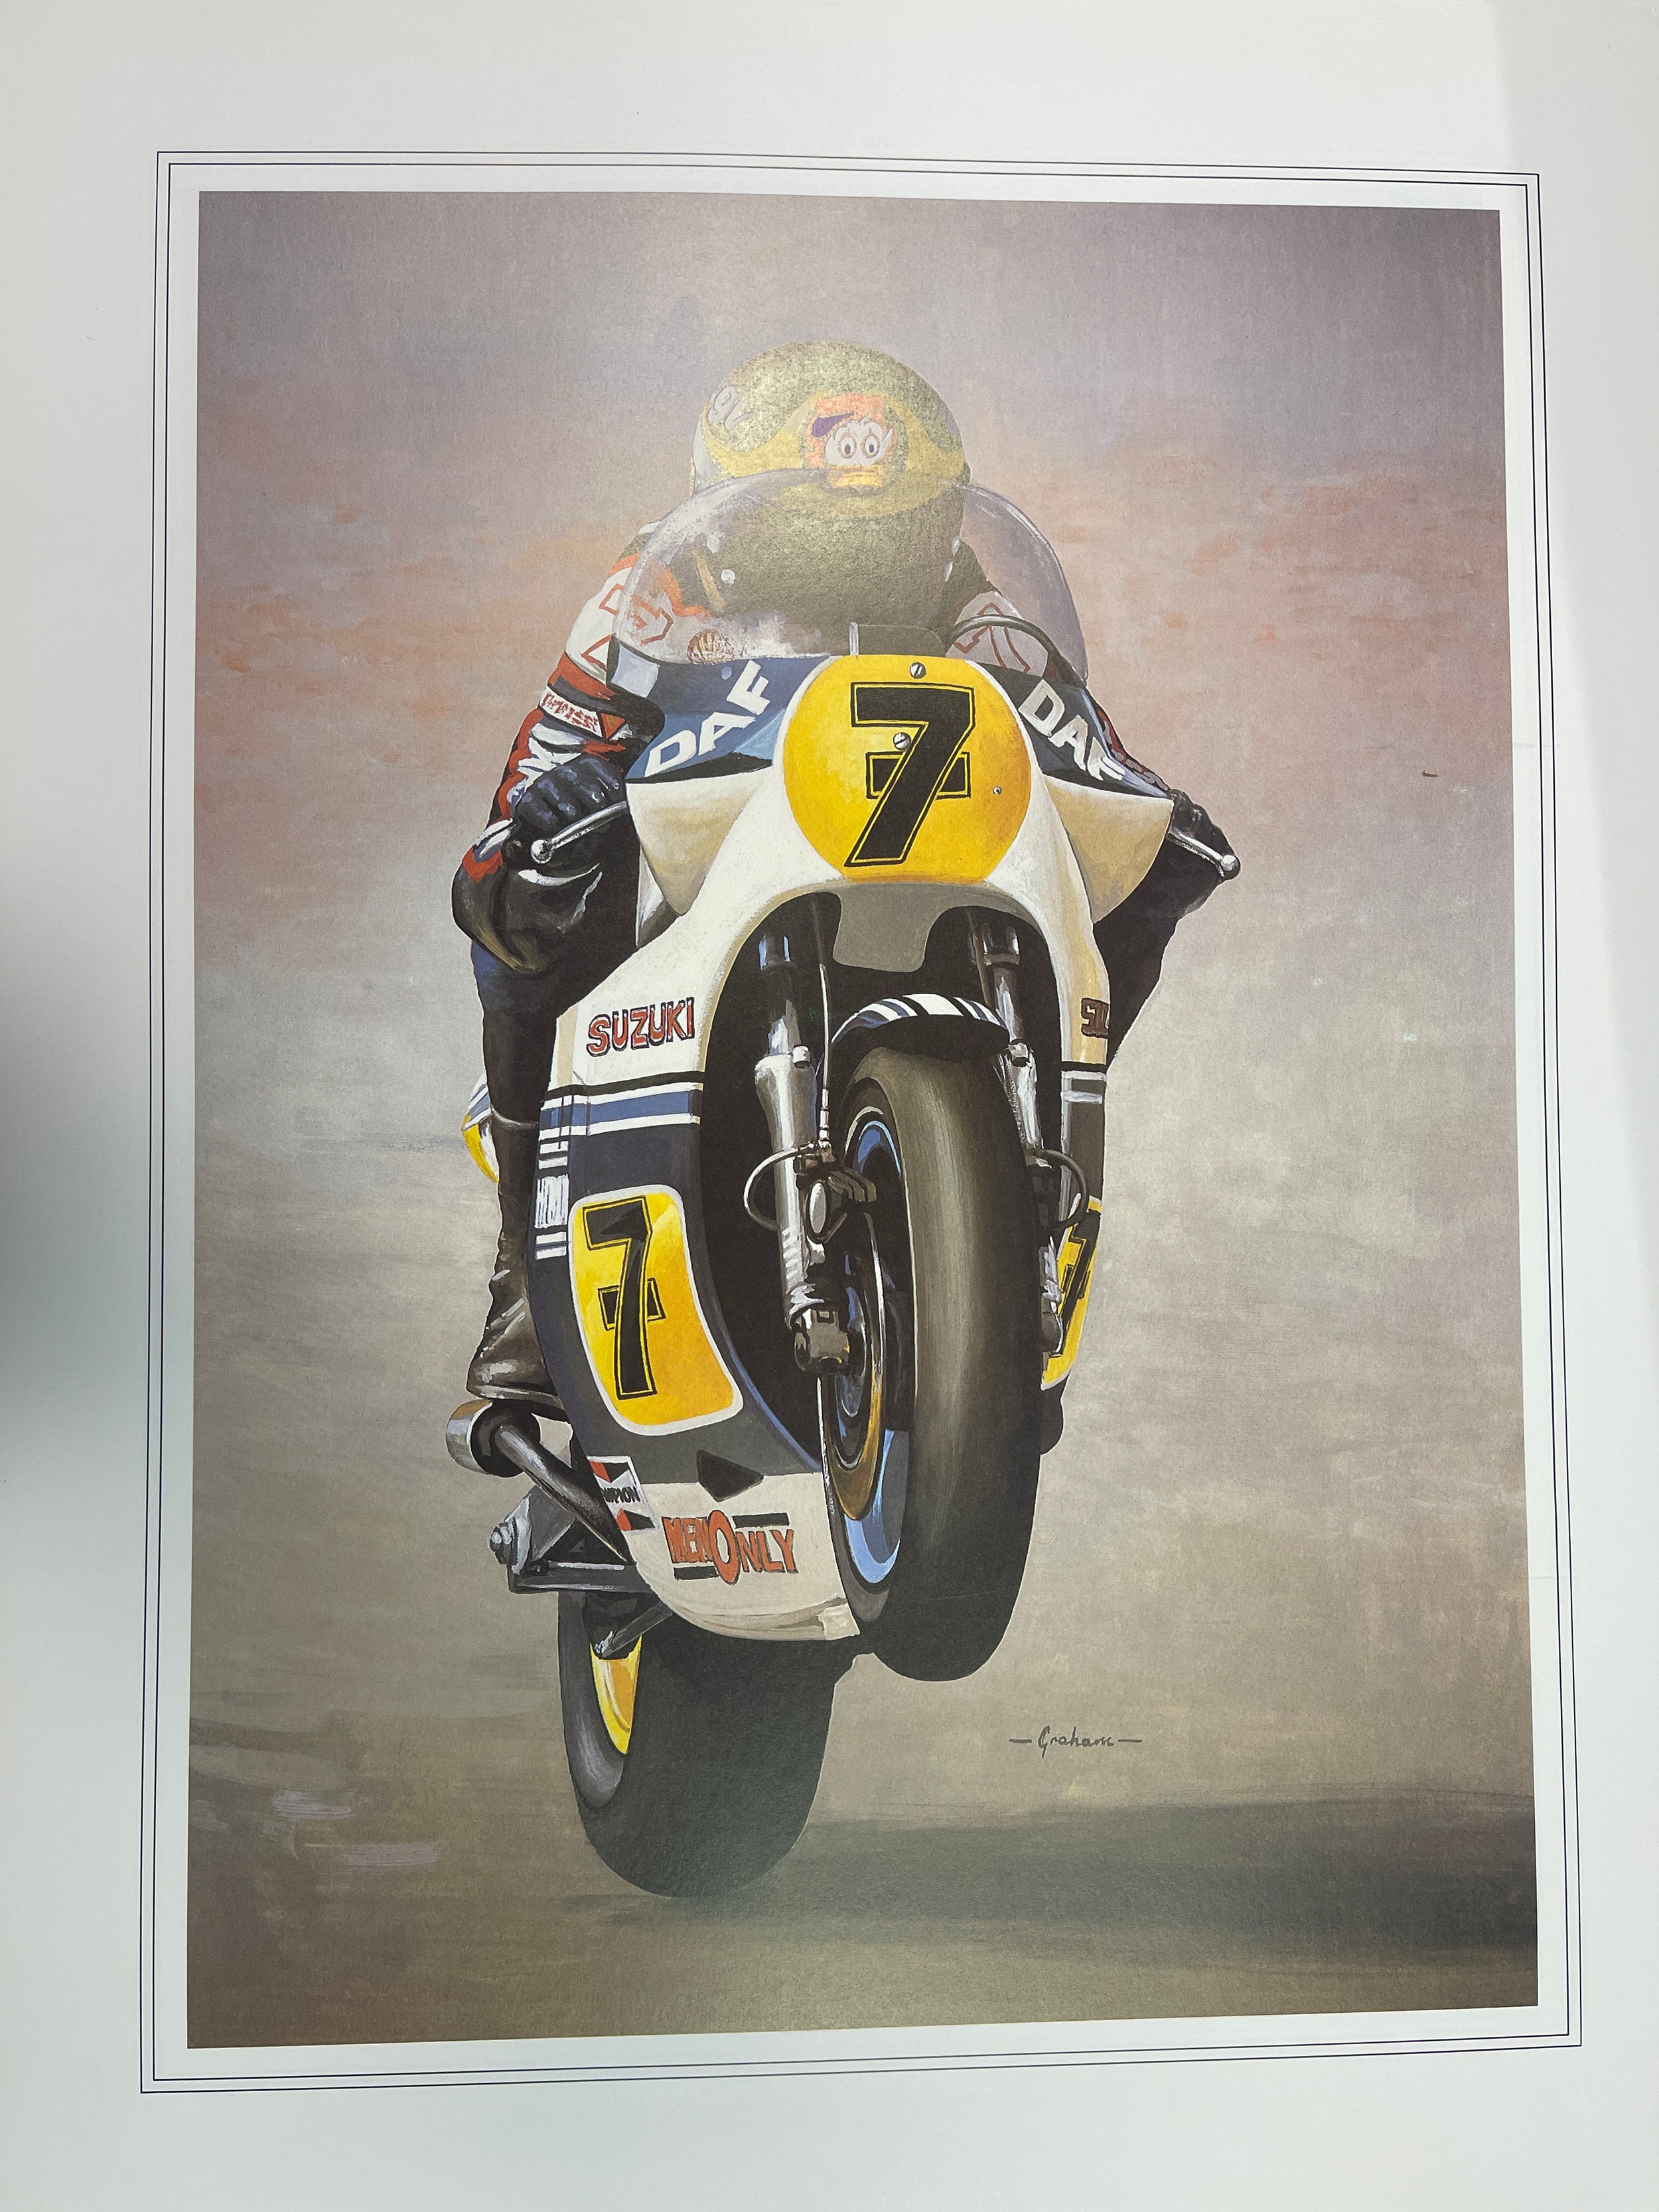 A group of prints by Steve Craner and Tony Graham, including Mick Grant on Suzuki, Barry Sheene on - Image 4 of 4